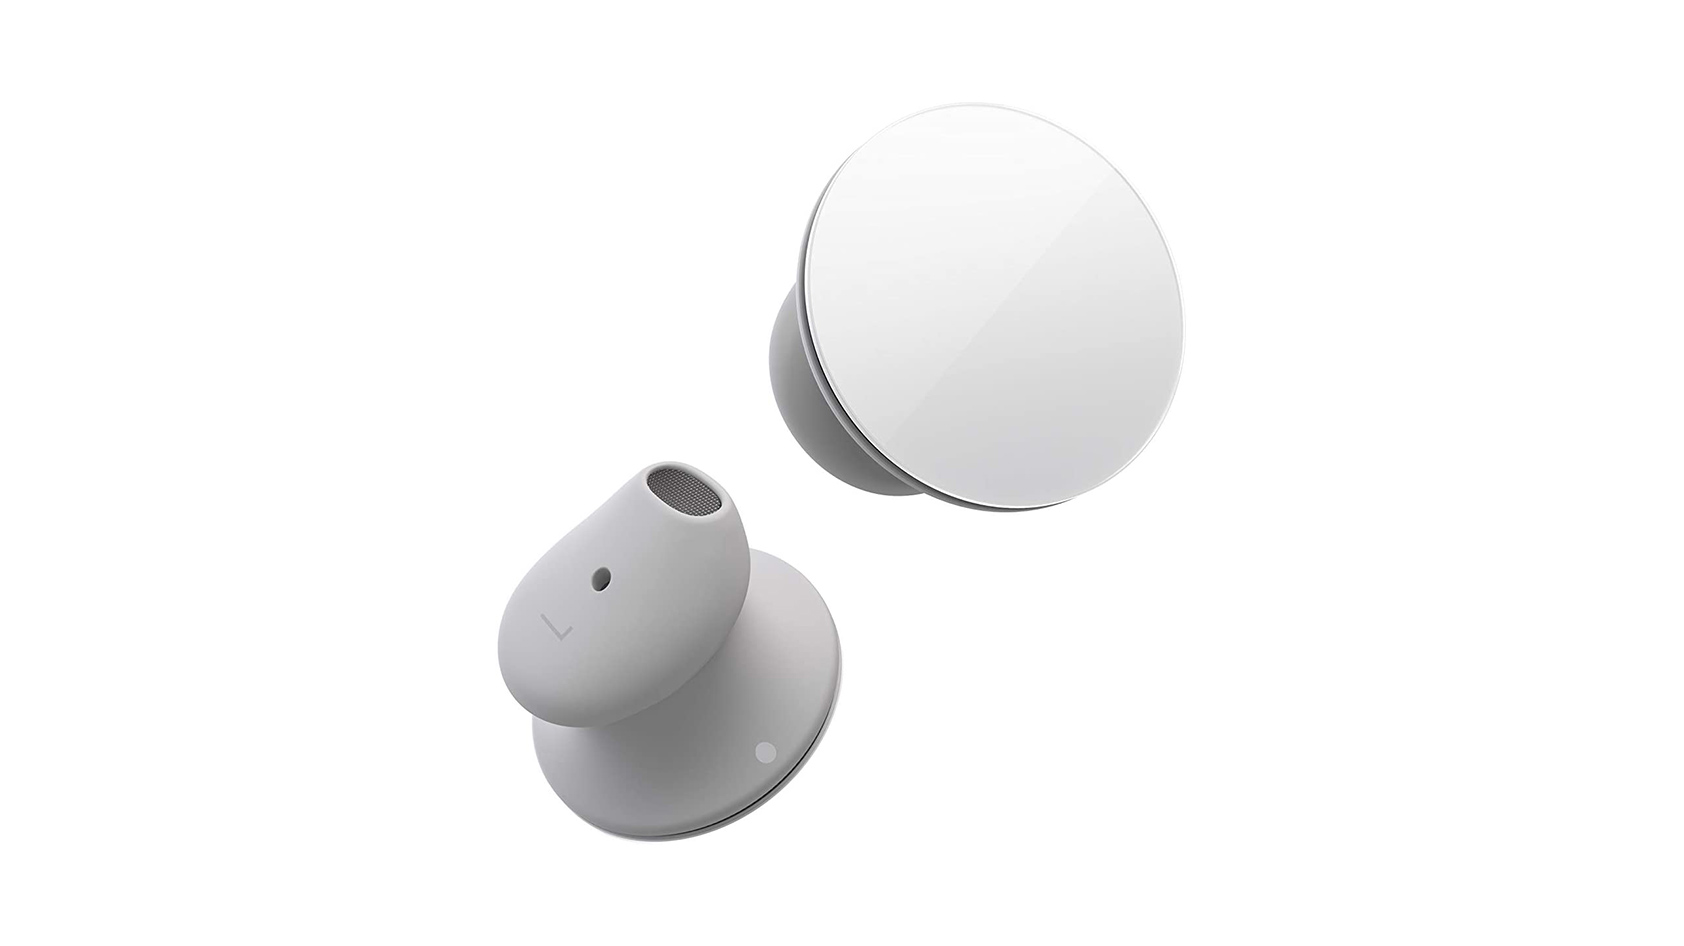 The Microsoft Surface Earbuds in white against a white background.